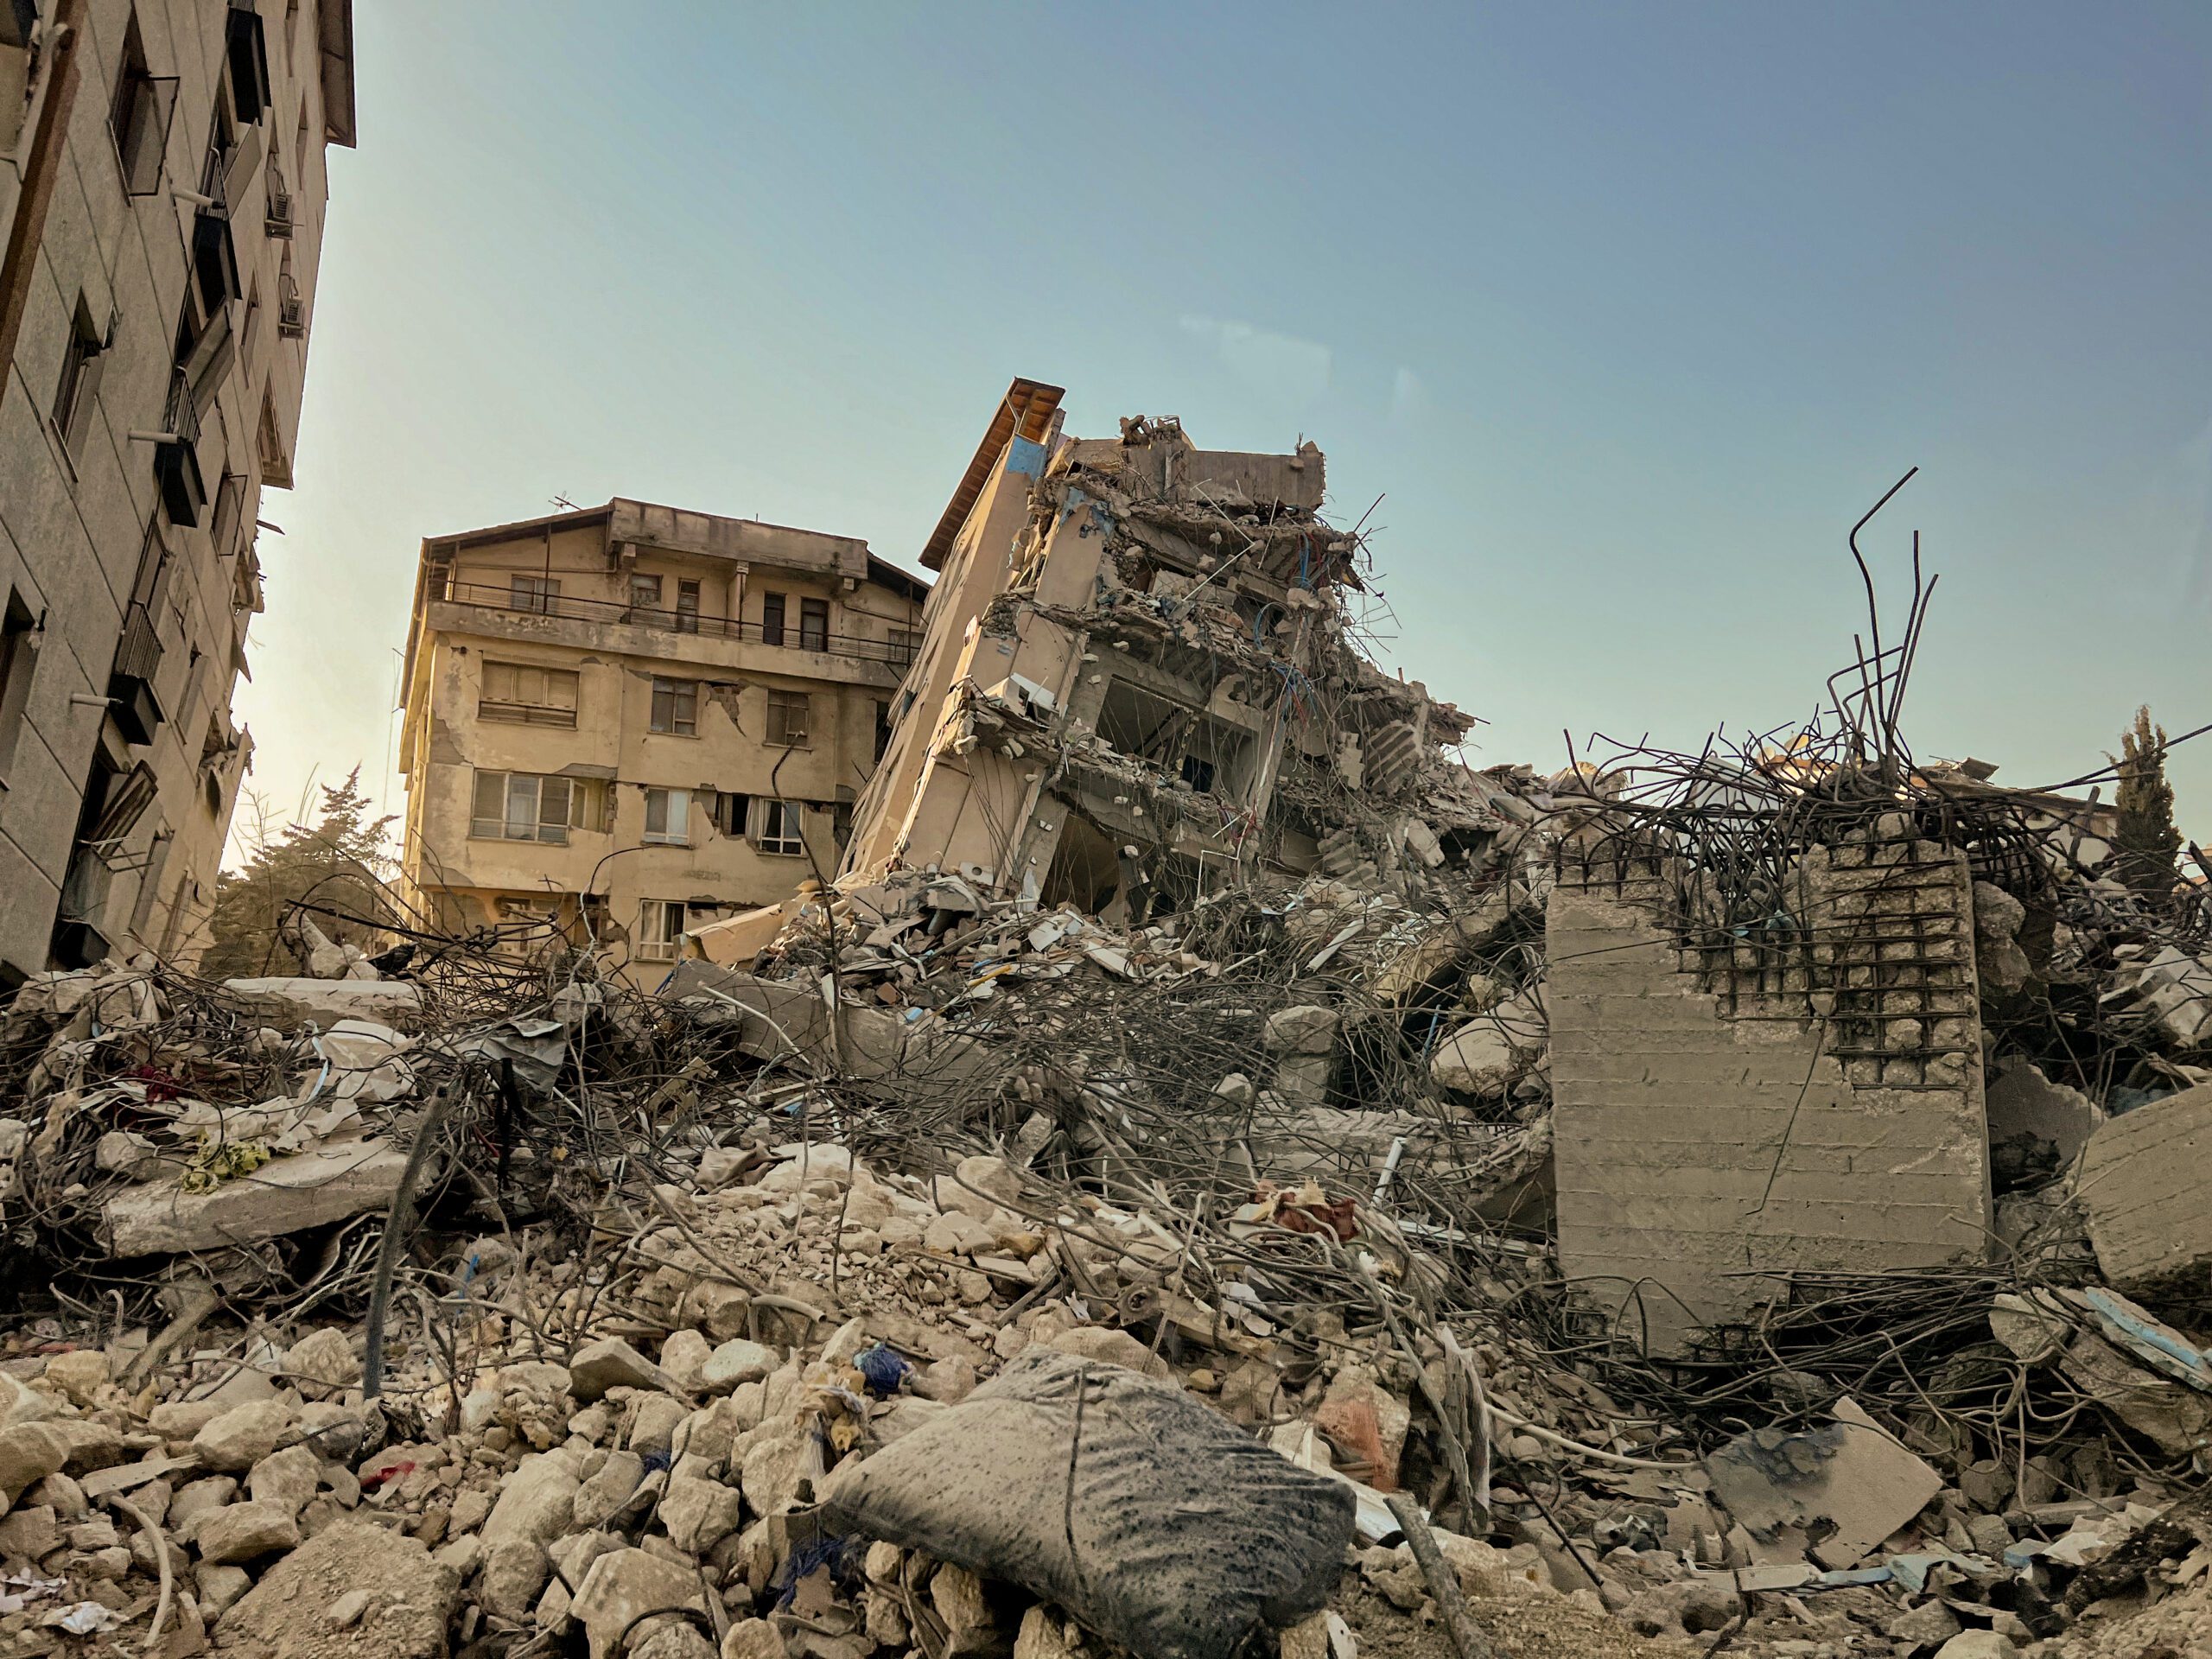 Collapsed Buildings from Turkey's Earthquake